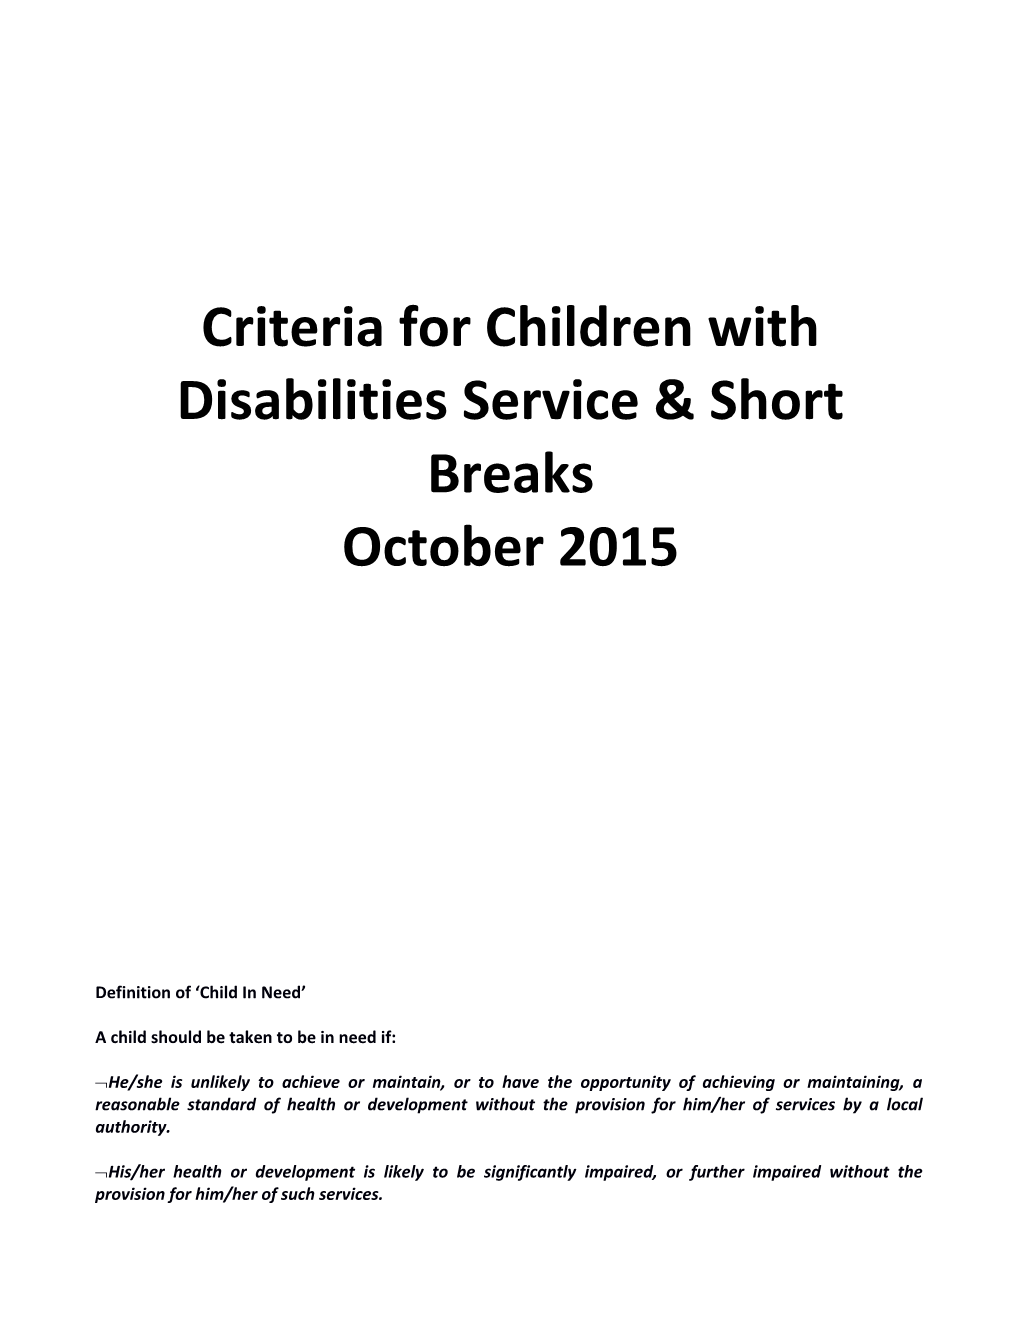 Criteria for Children with Disabilities Service & Short Breaks